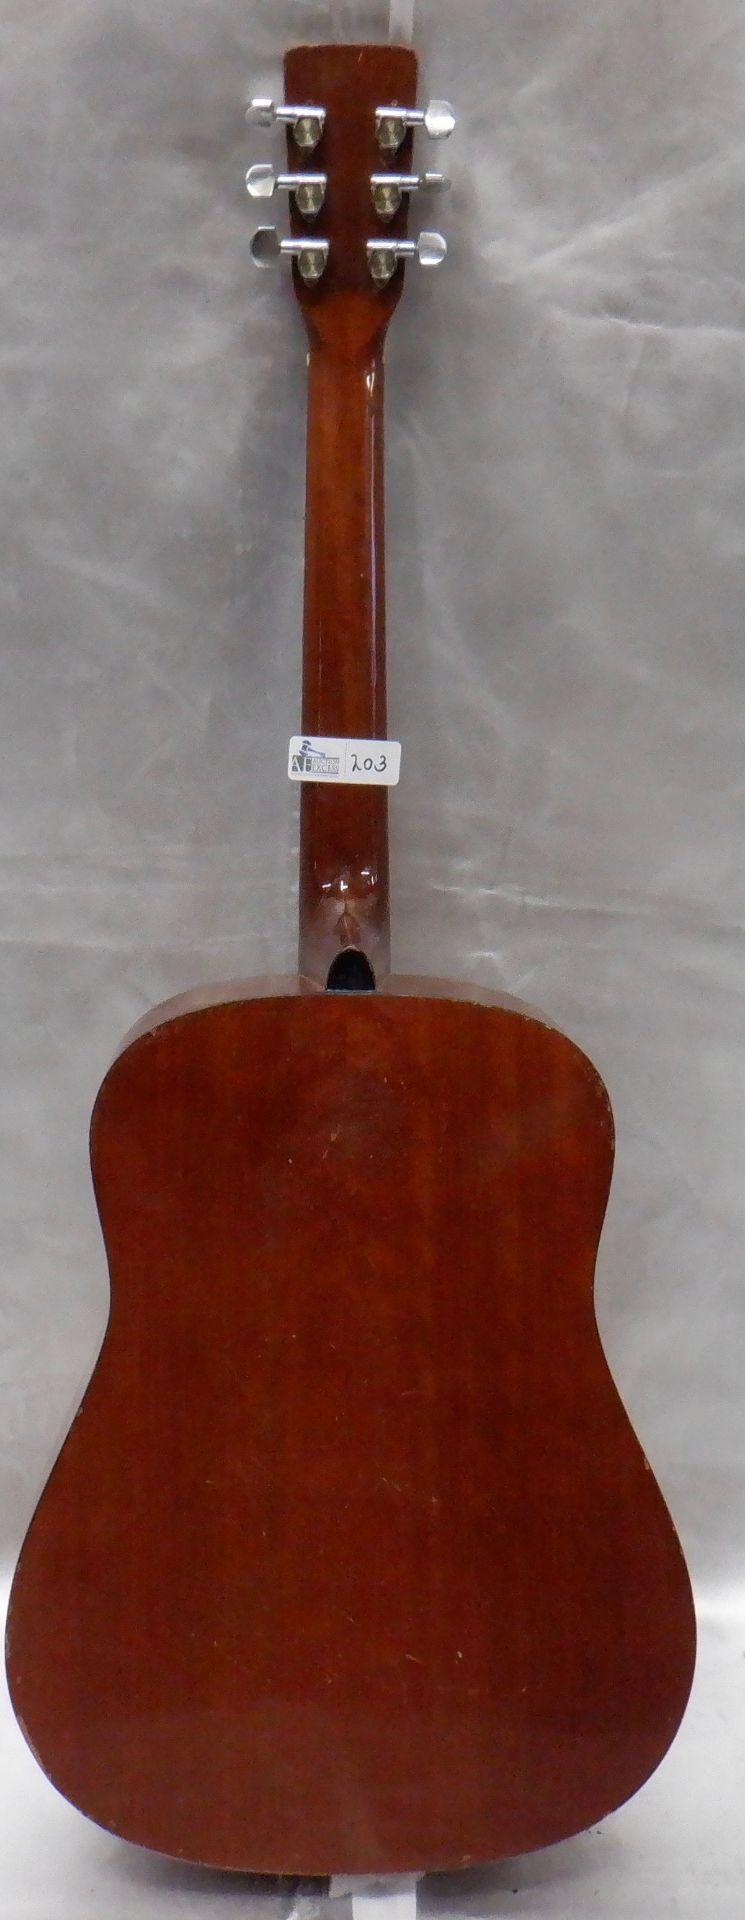 KAY 505 GUITAR WITH CASE - Image 5 of 7